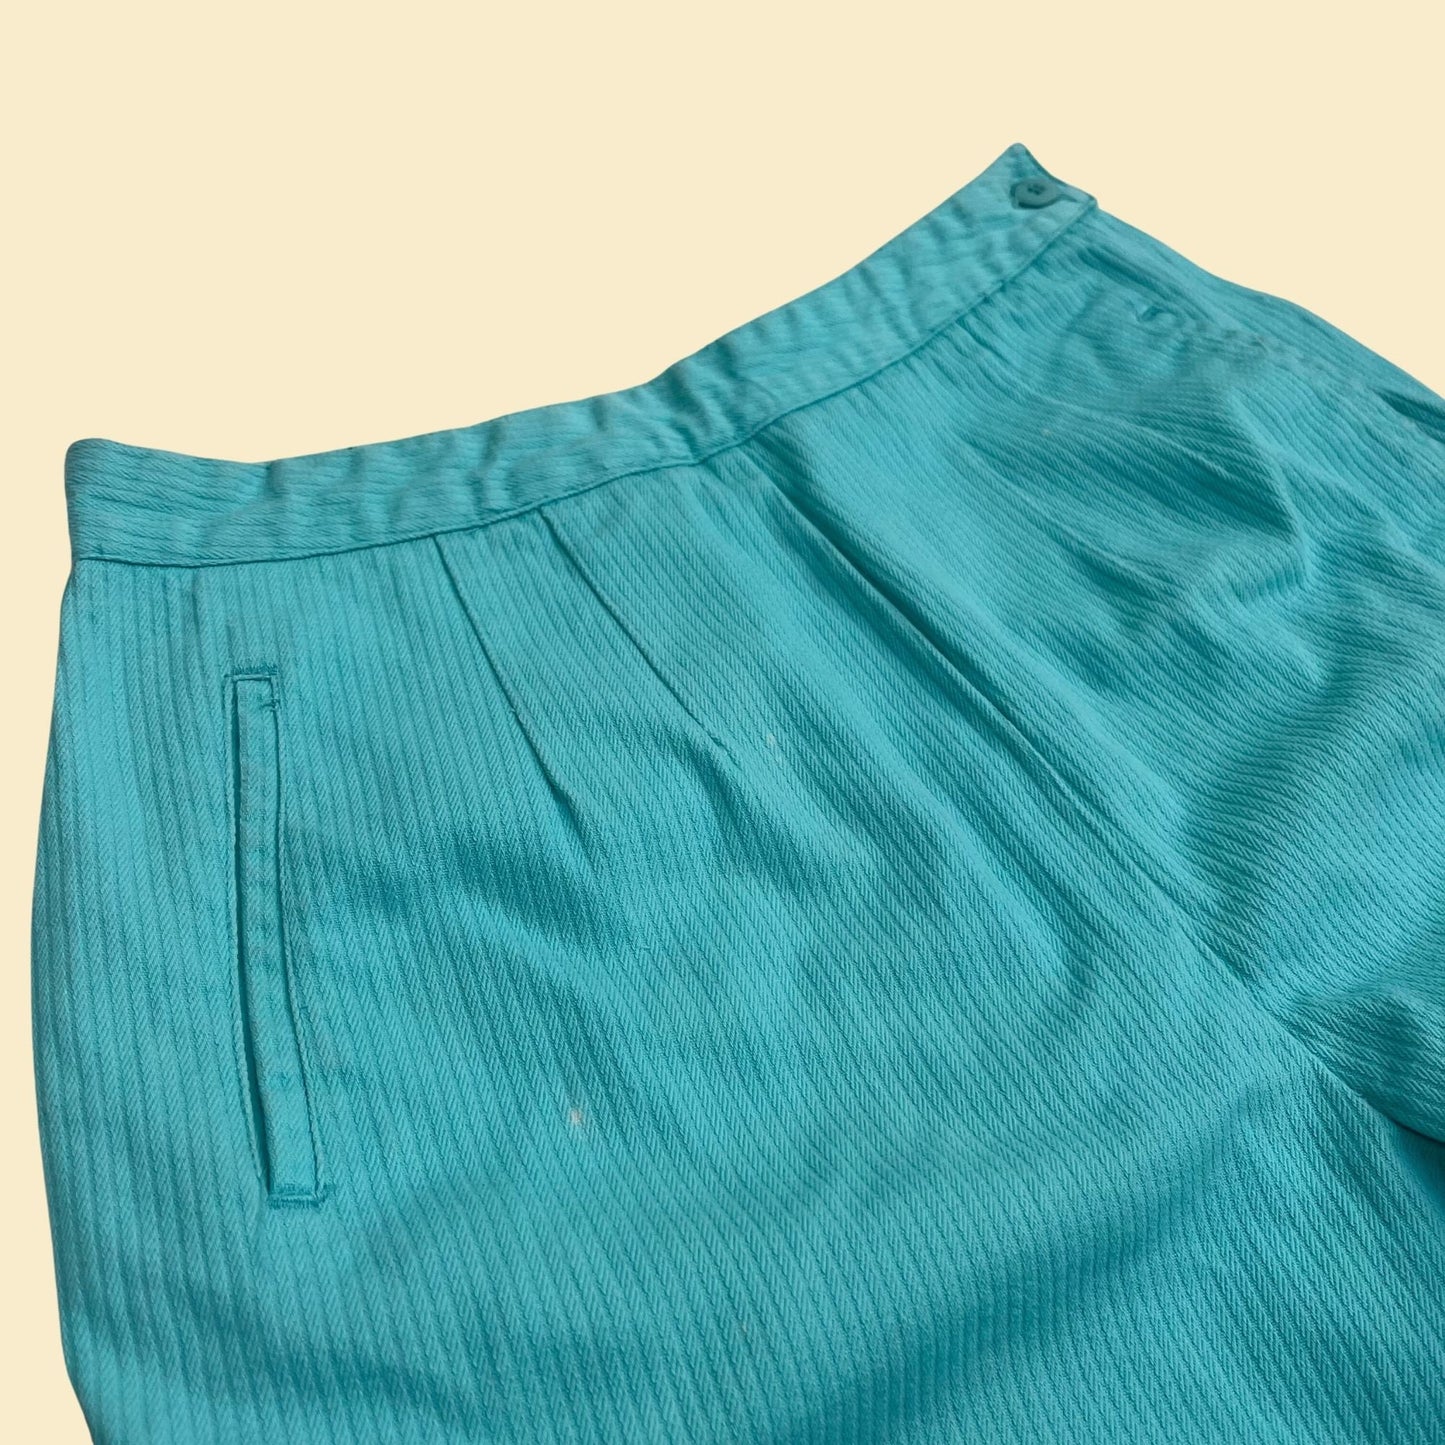 80s teal pants by Organically Grown, vintage side zip size 13 ribbed jeans, turquoise women's 1980s pants